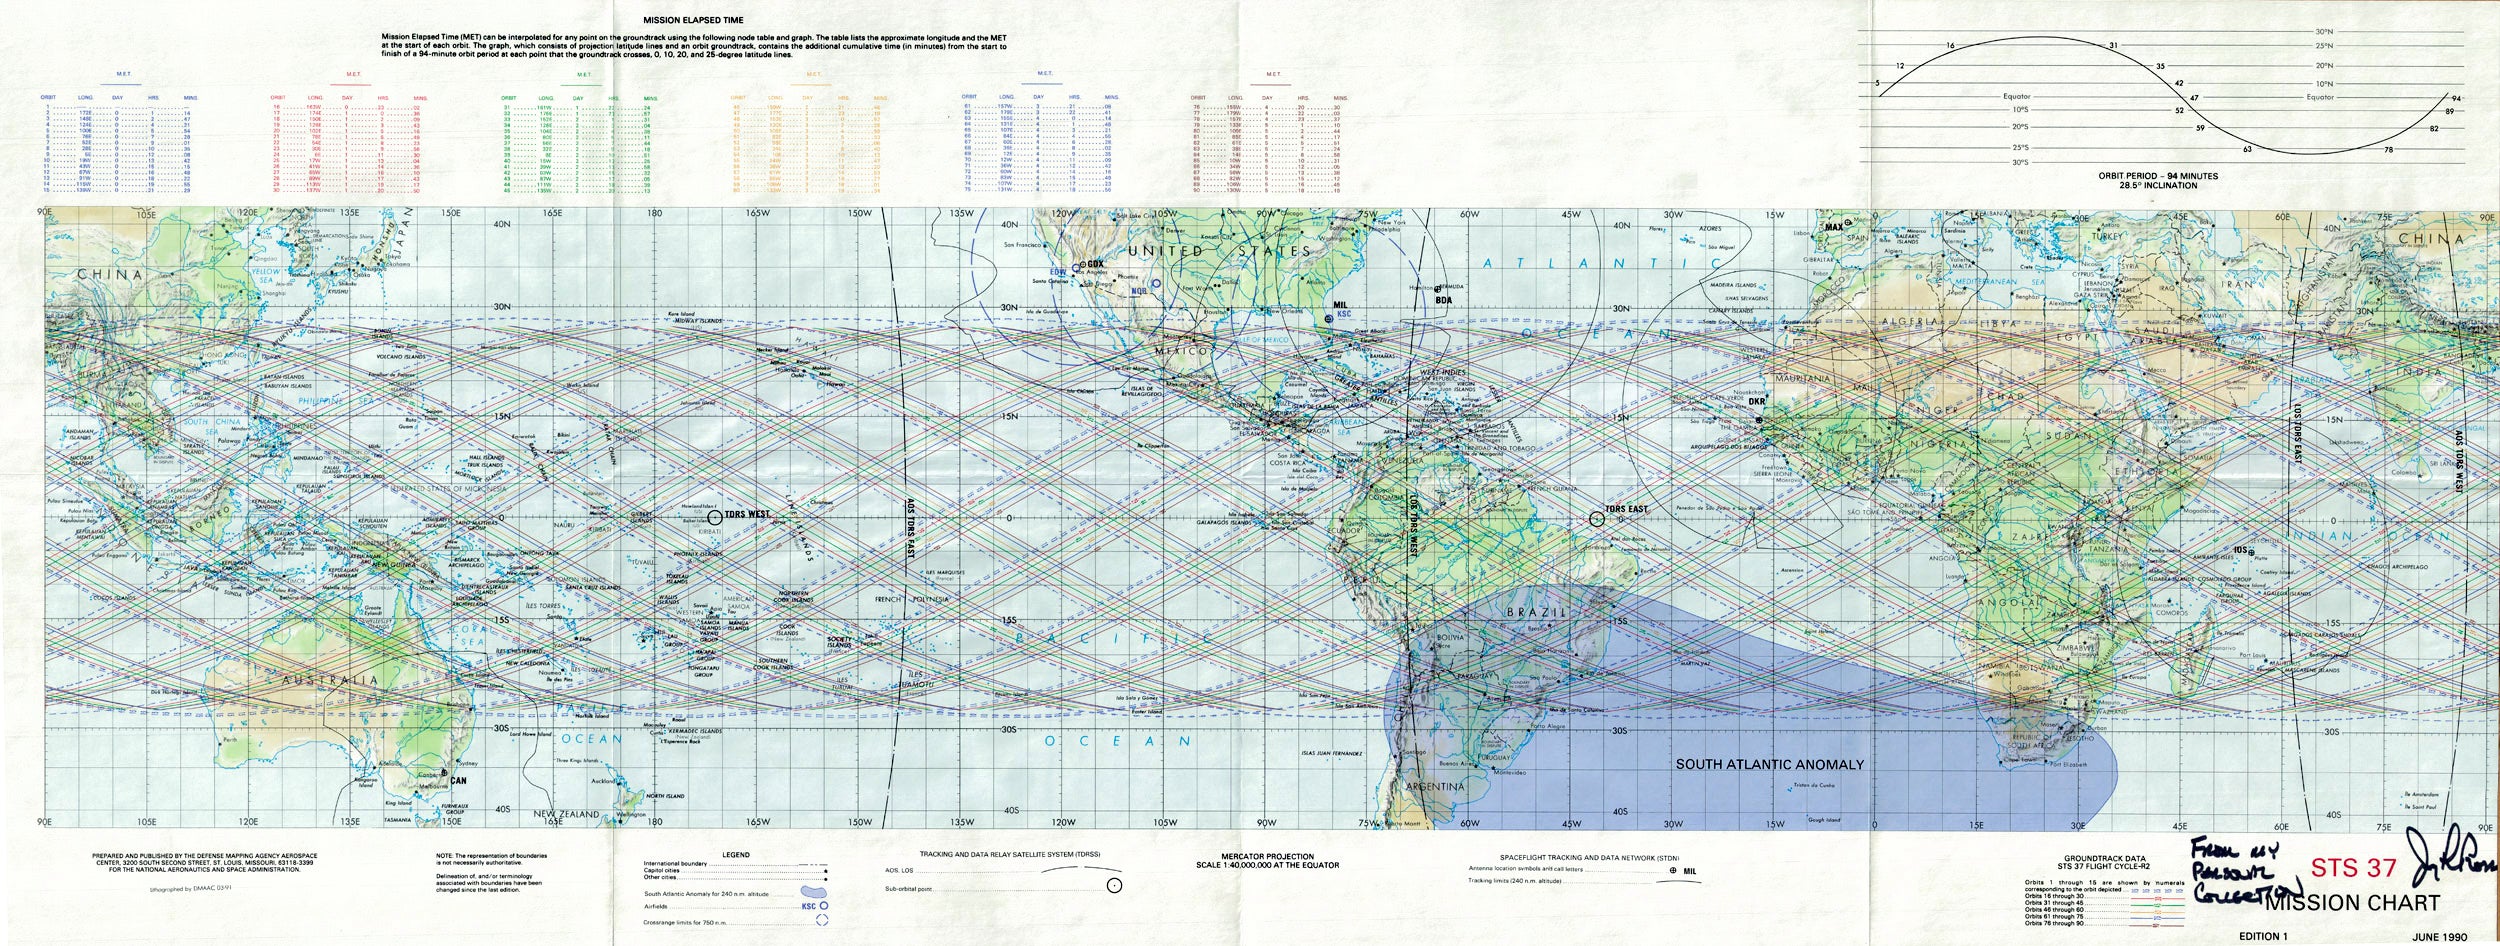 (Space - Space Shuttle) STS 37 Mission Chart